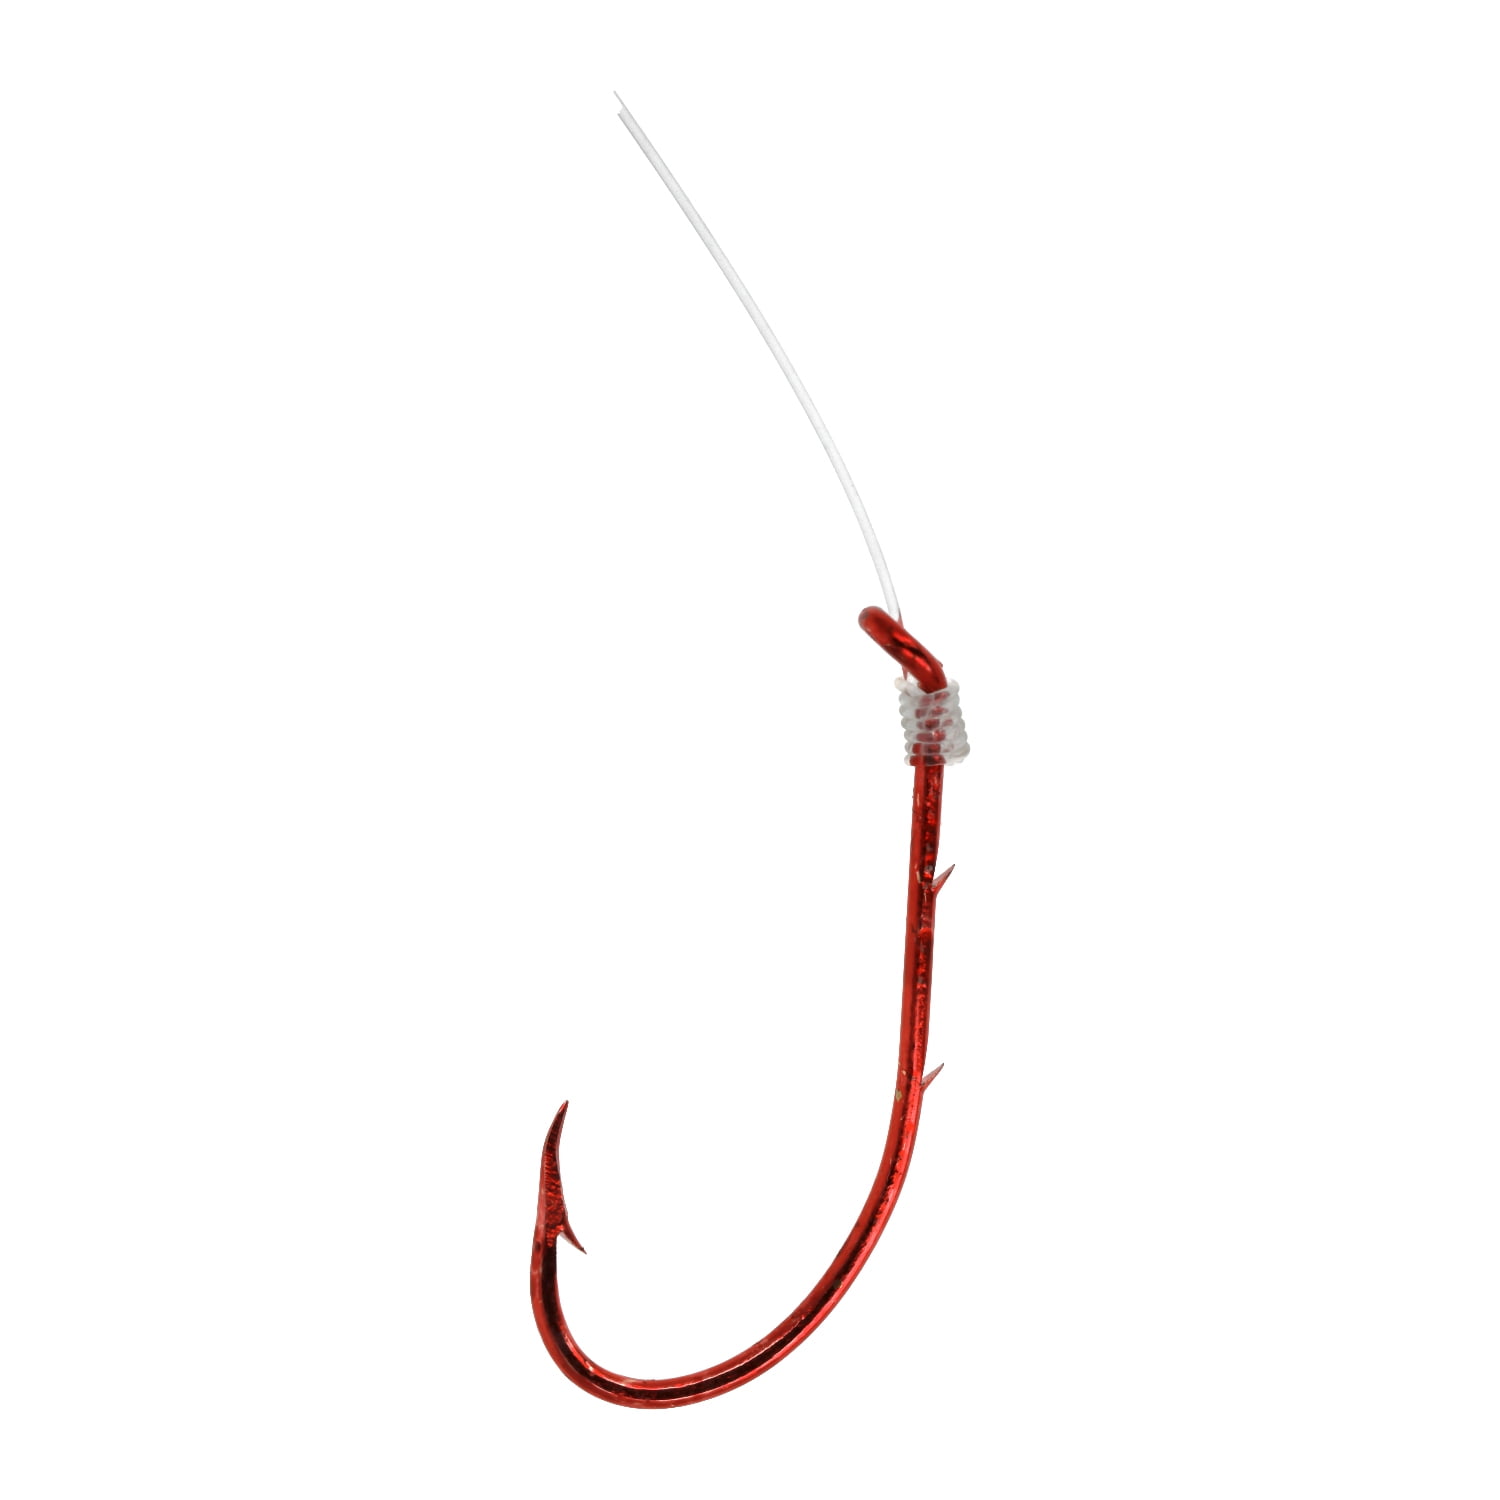 Owner Red Super Needle Point Hook Size 7/0 - For Baiting Up Nightcrawlers